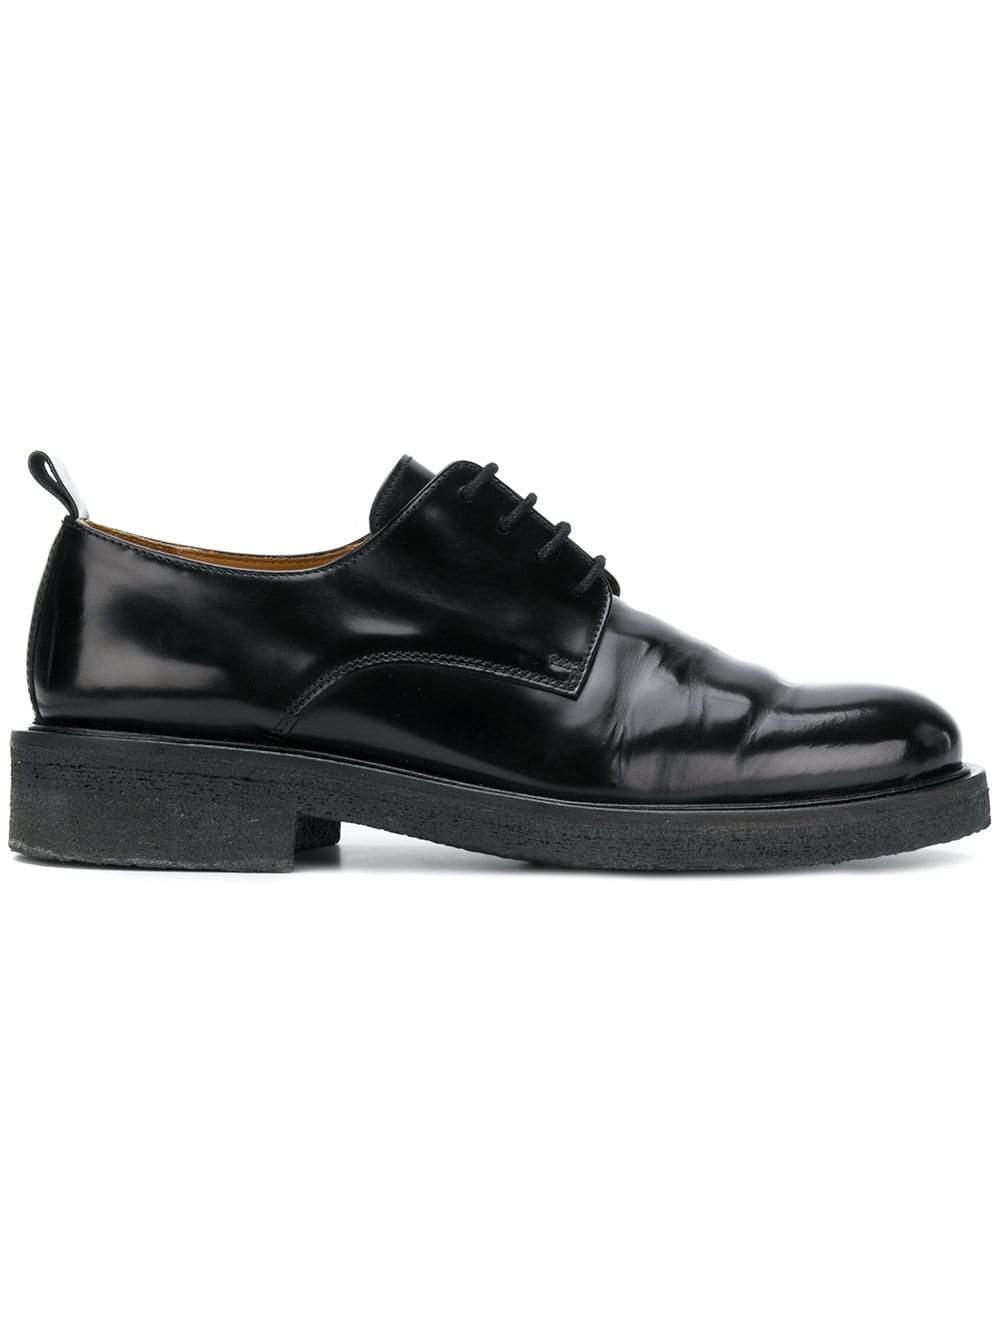 AMI Leather Derbies in Black for Men - Lyst